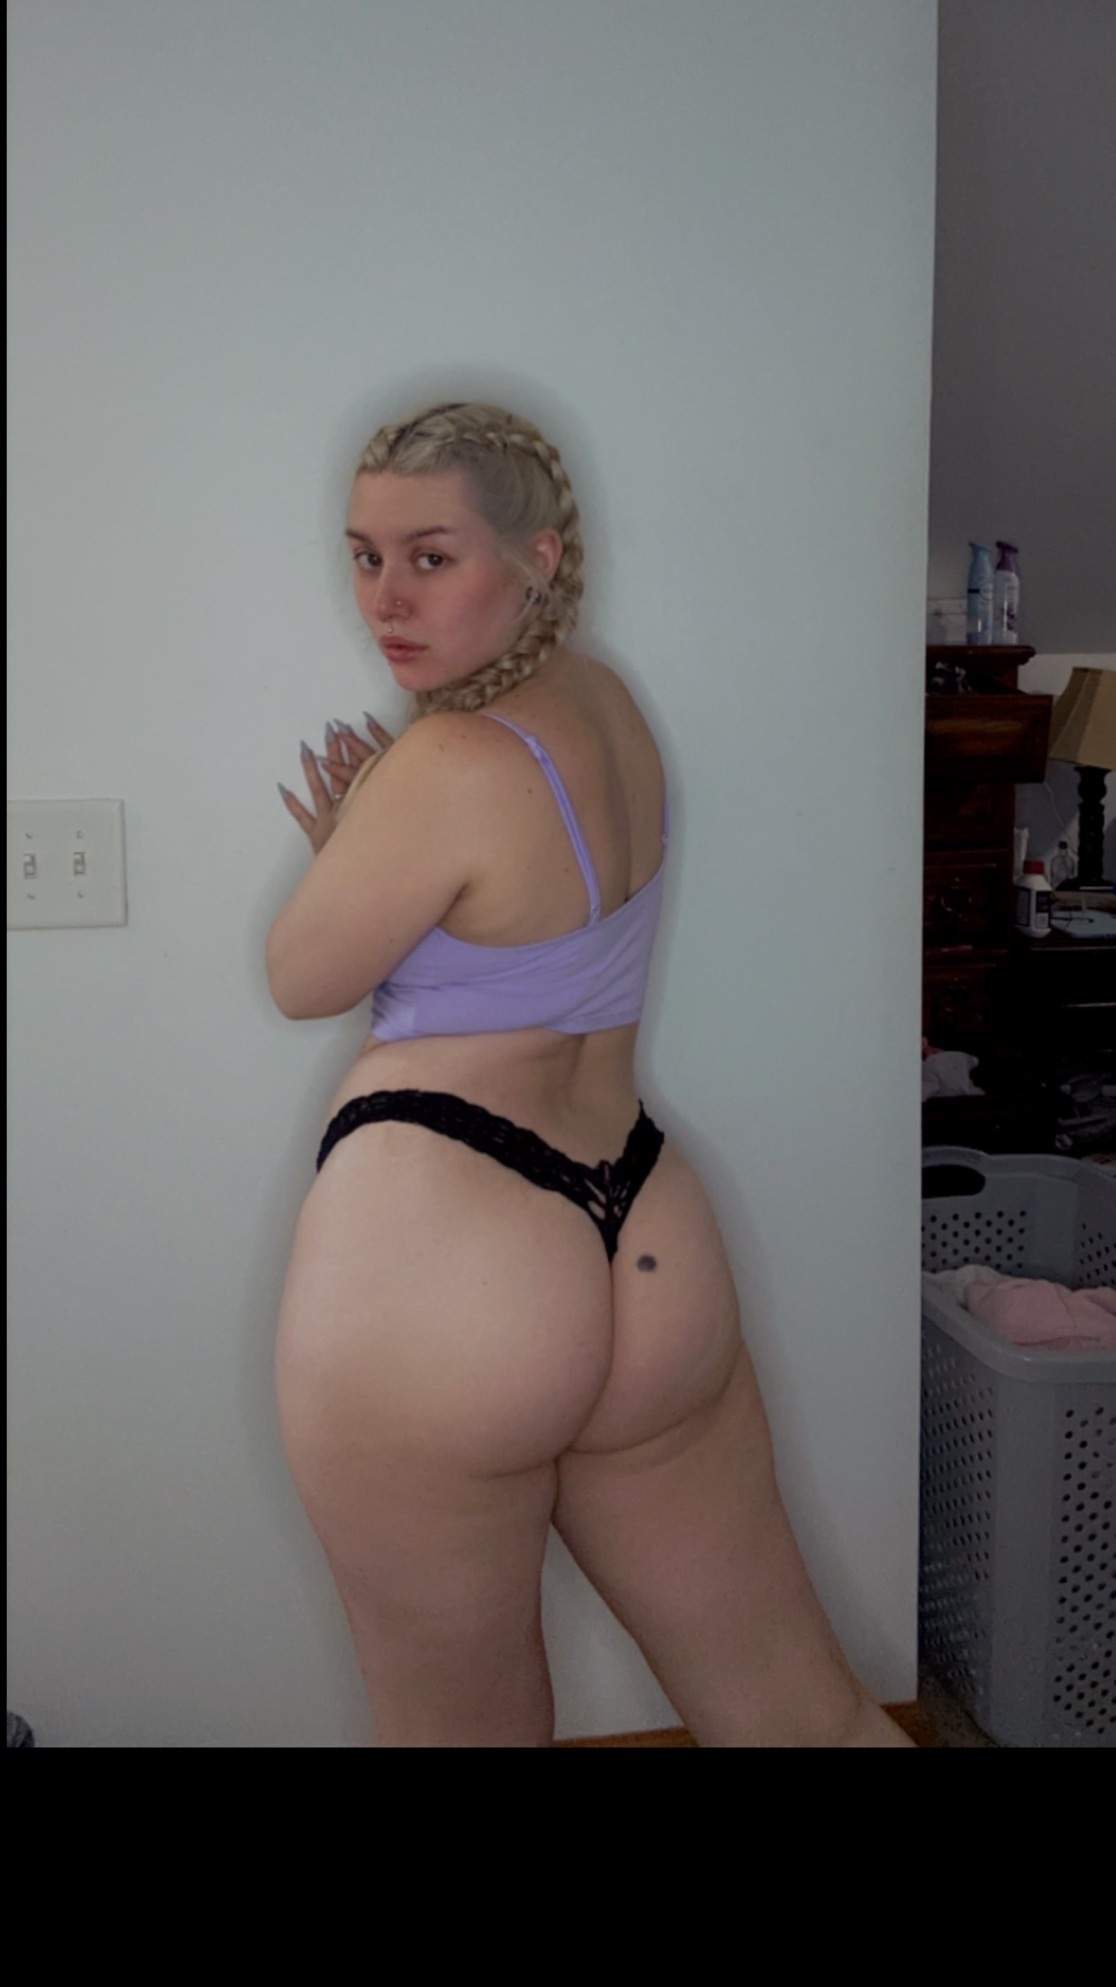 bootybabylove